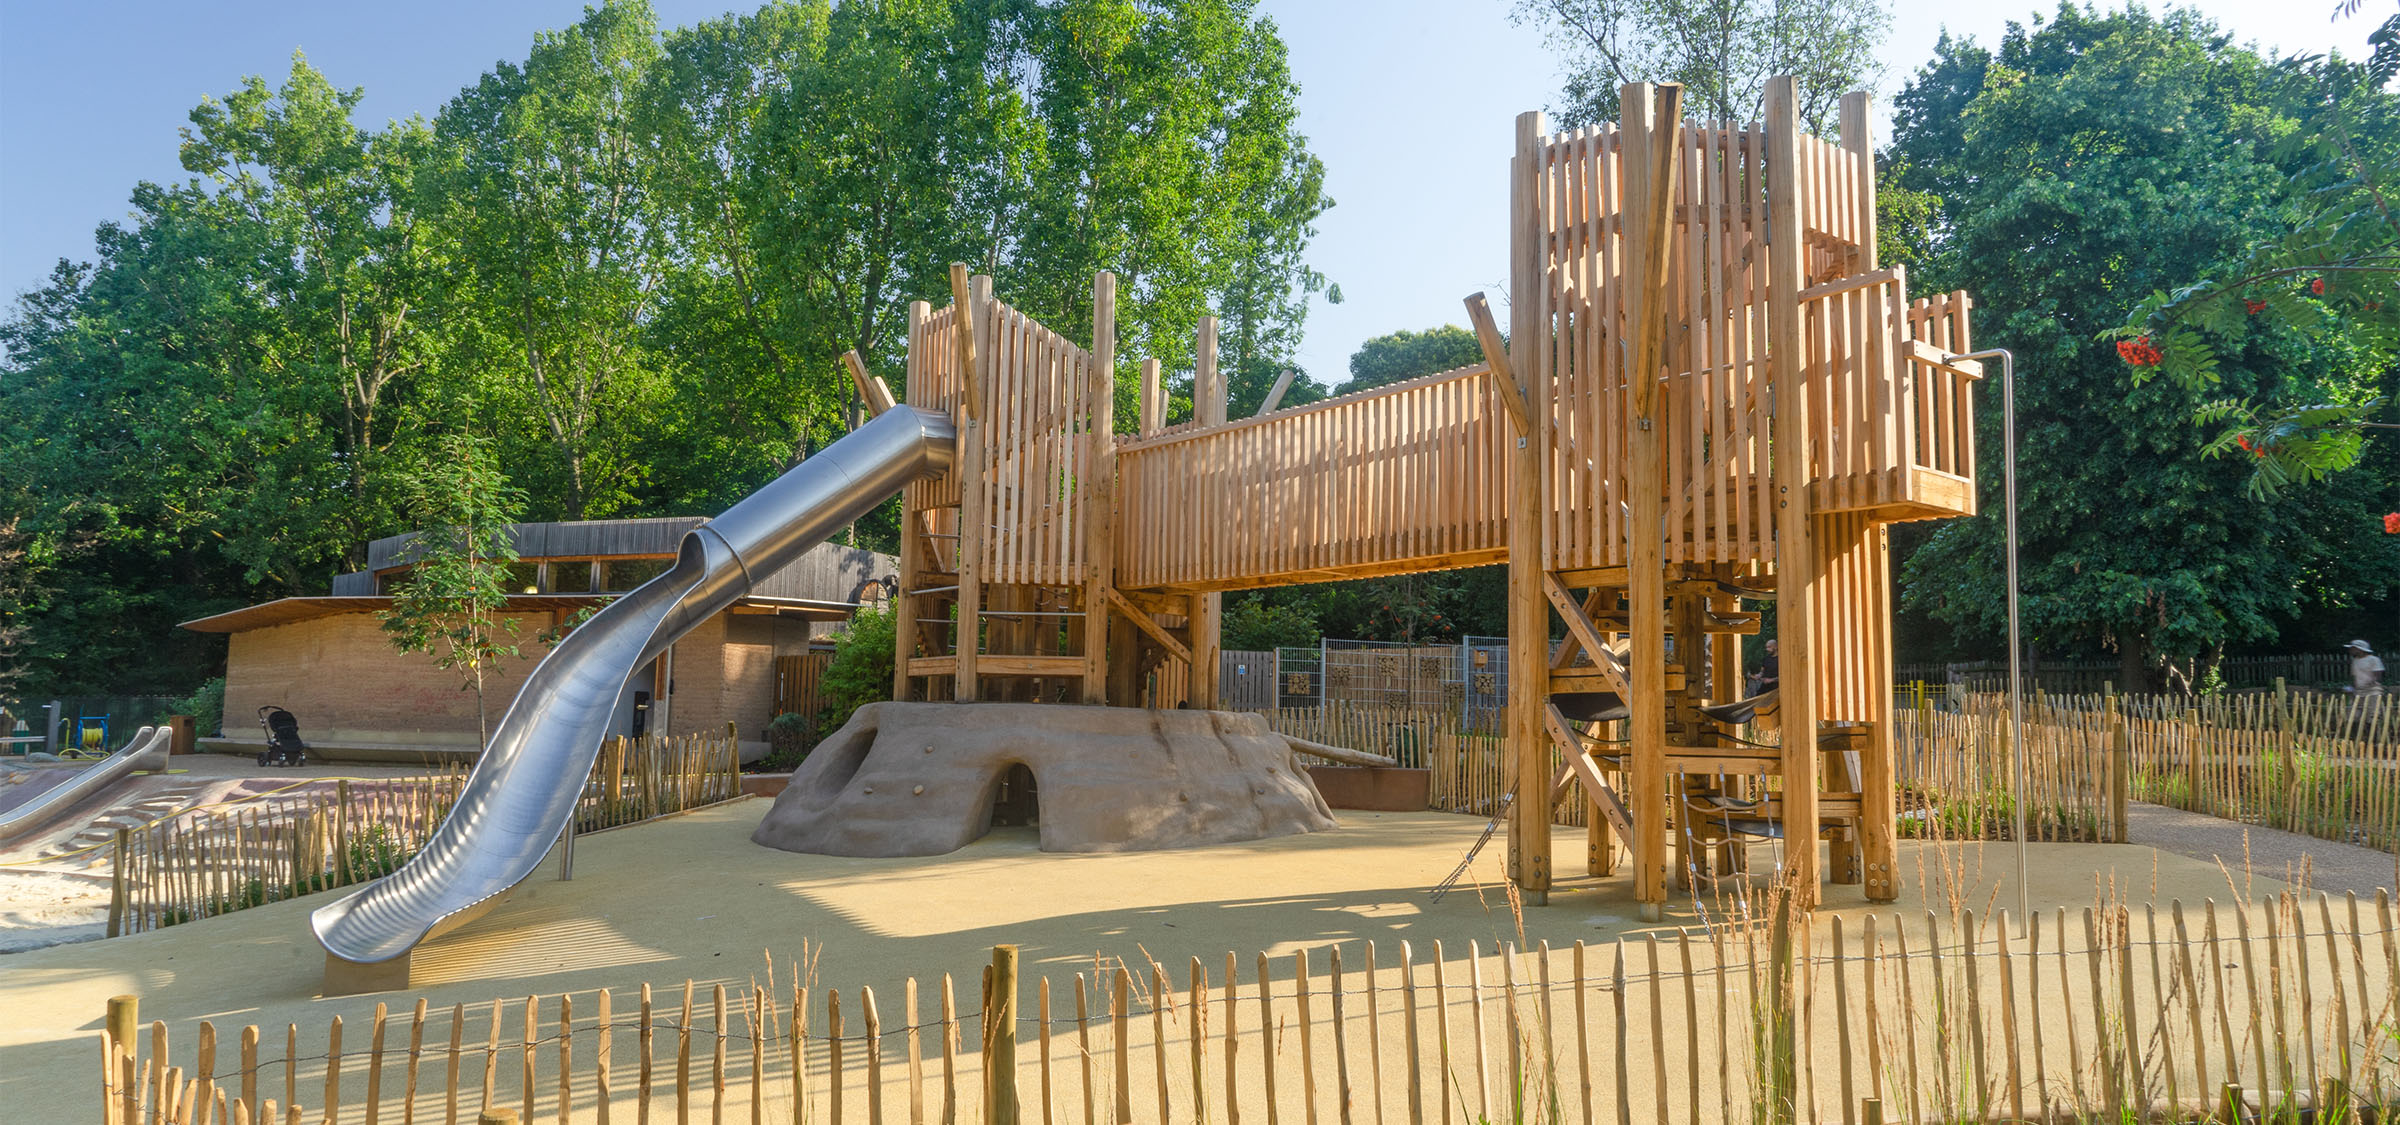 Holland Park Adventure Playgrounds in United Kingdom, Europe | Playgrounds - Rated 3.9